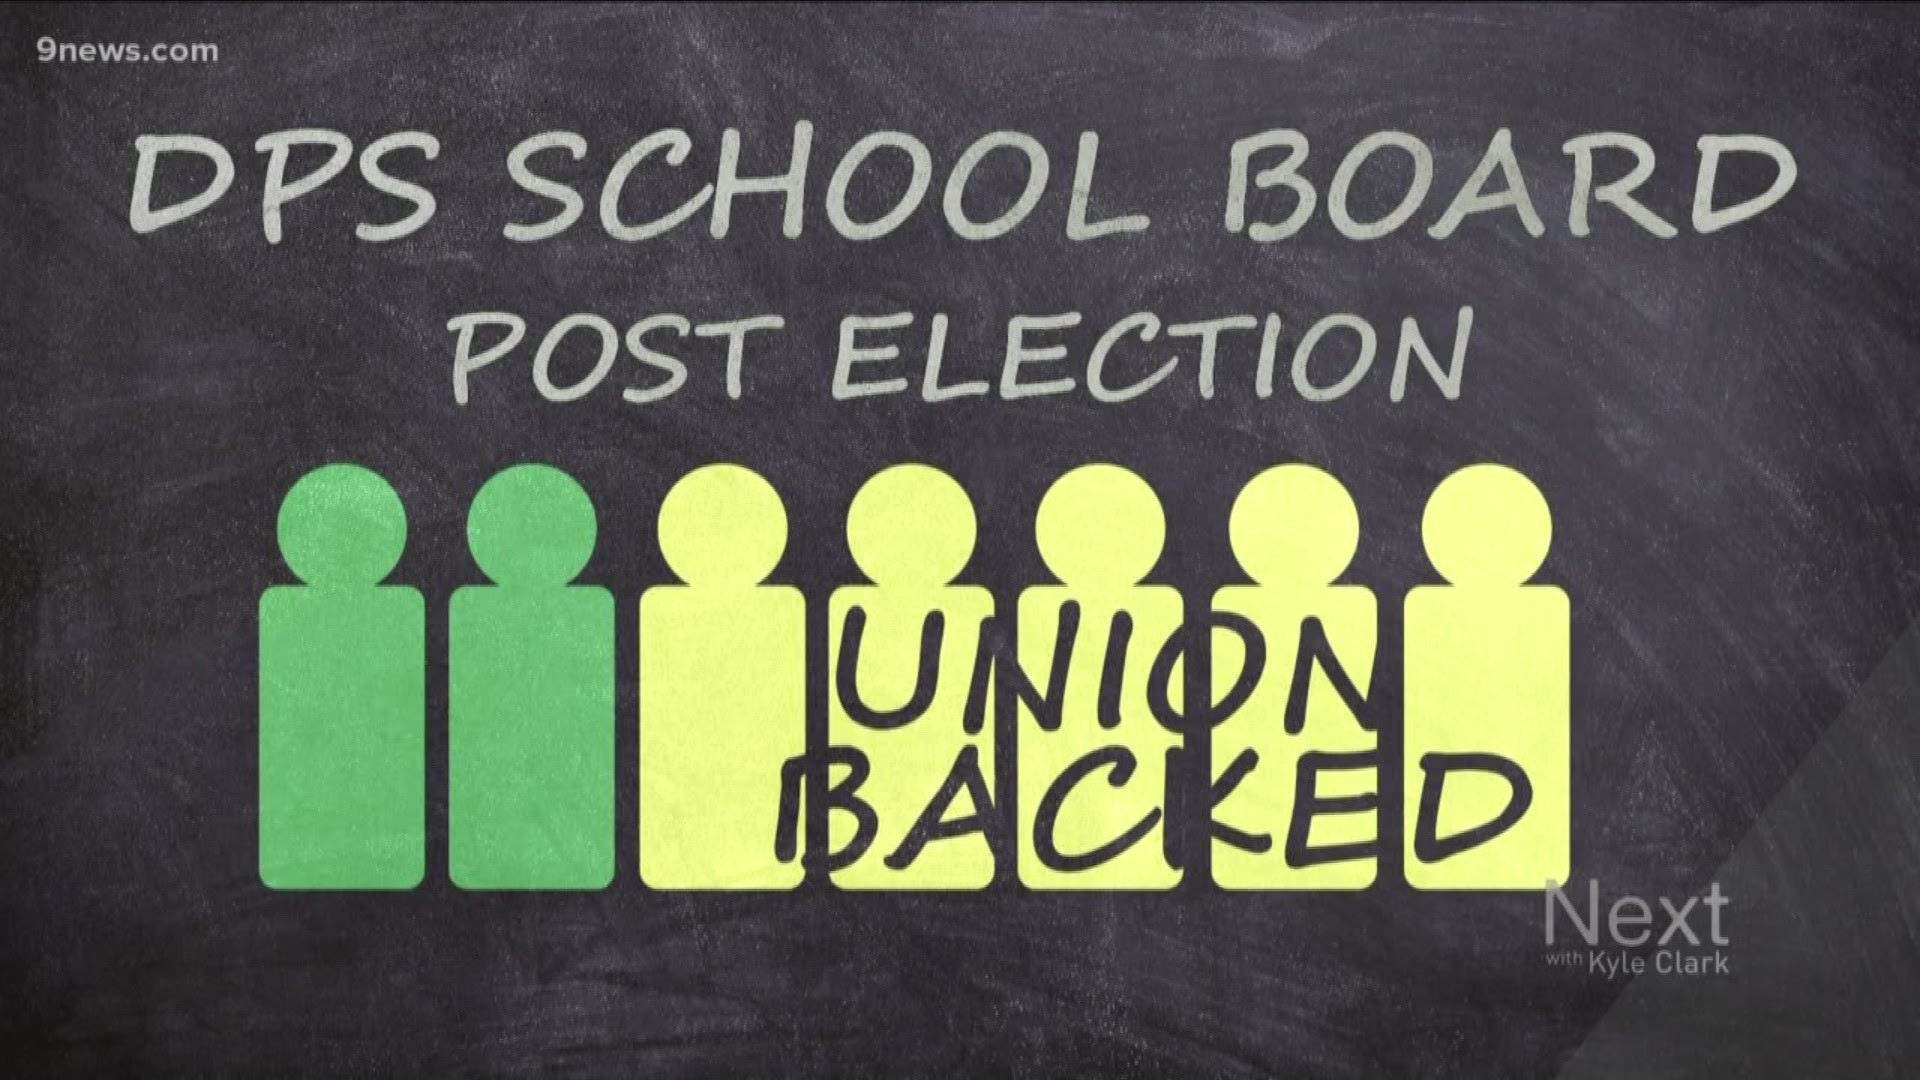 So-called reformers have dominated the Denver School Board for decades. Tuesday, Union-backed candidates won a majority on the board.